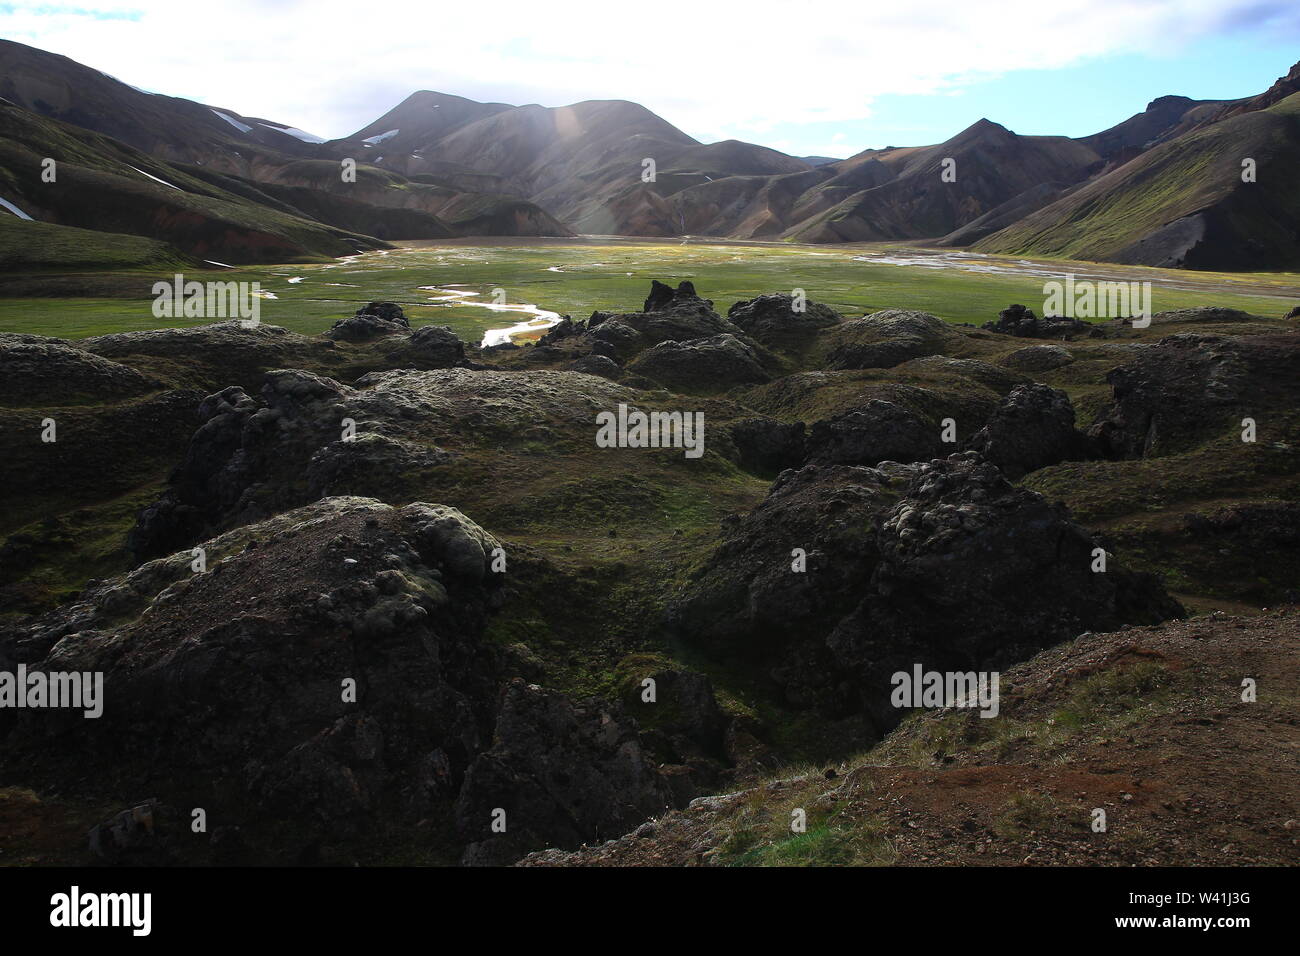 July in Iceland, one of the appearances of Landmannalaugar Stock Photo